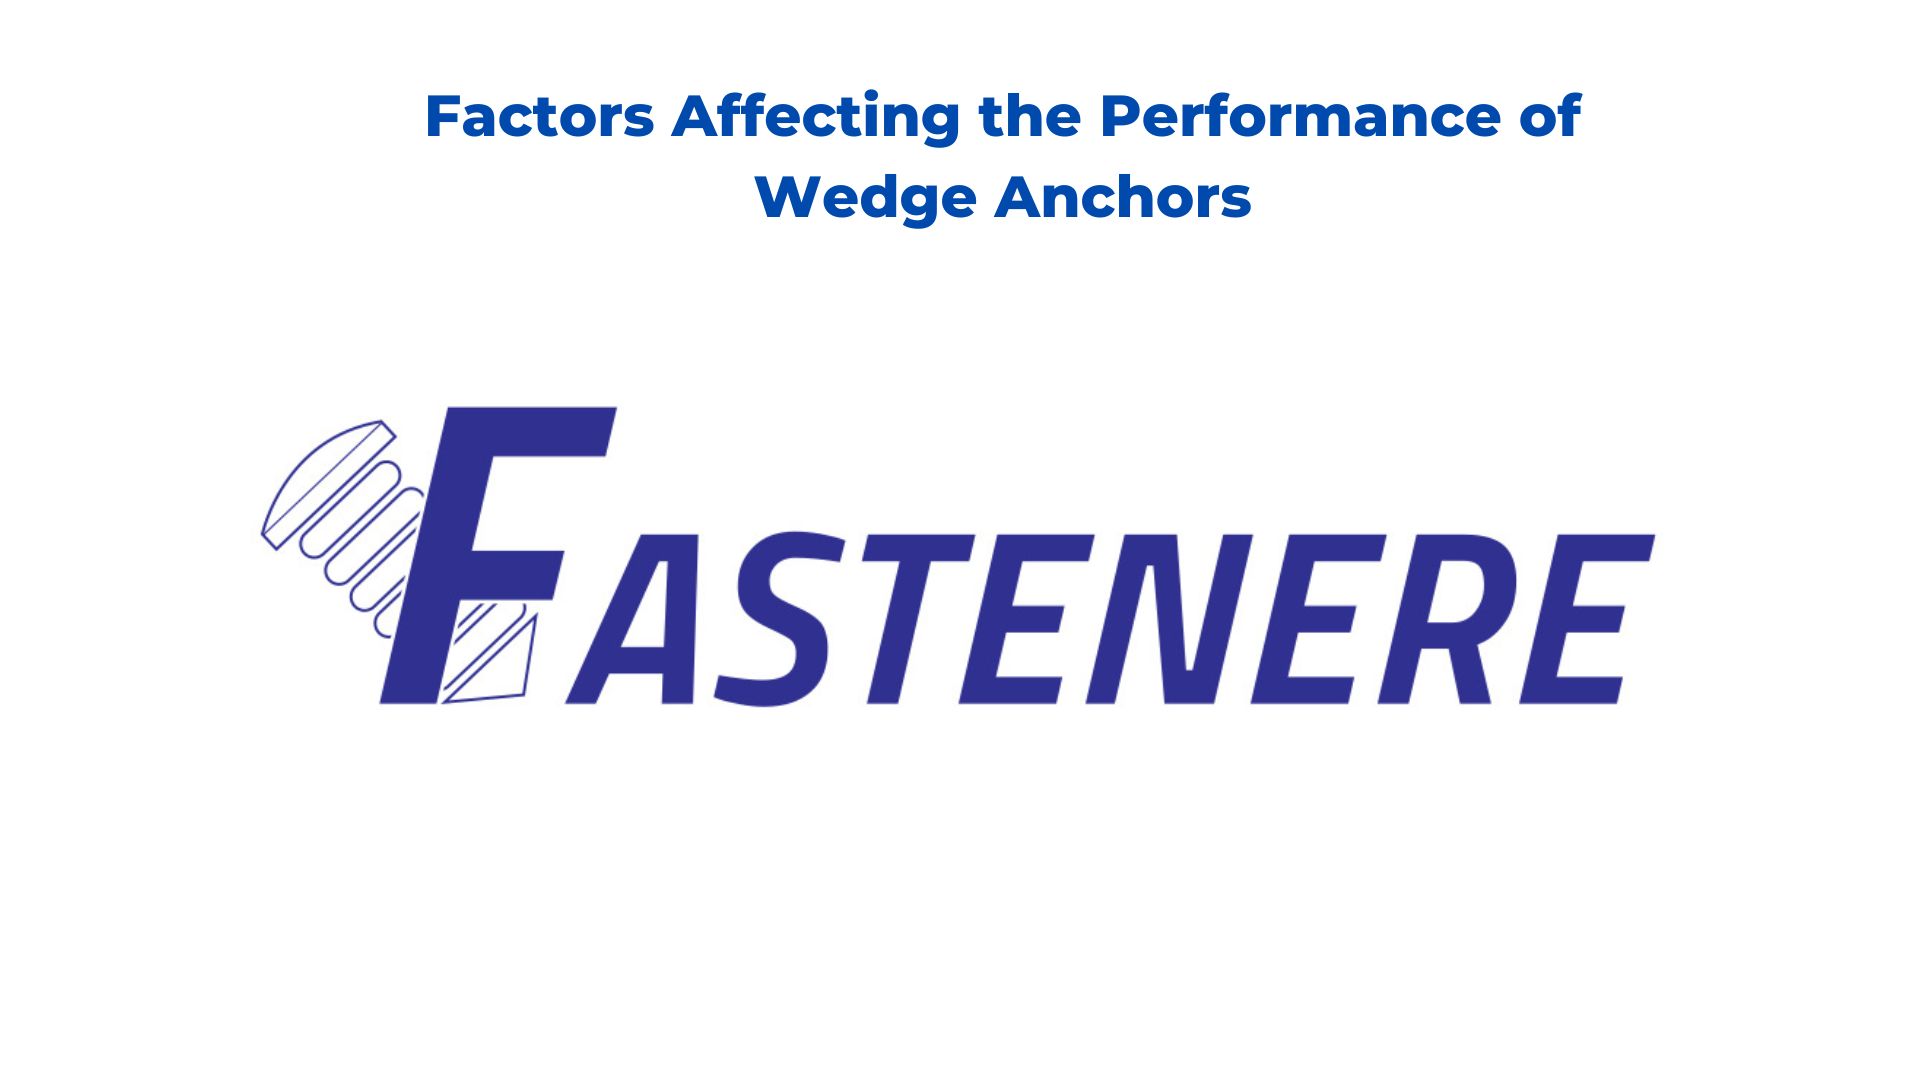 Factors Affecting the Performance of Wedge Anchors